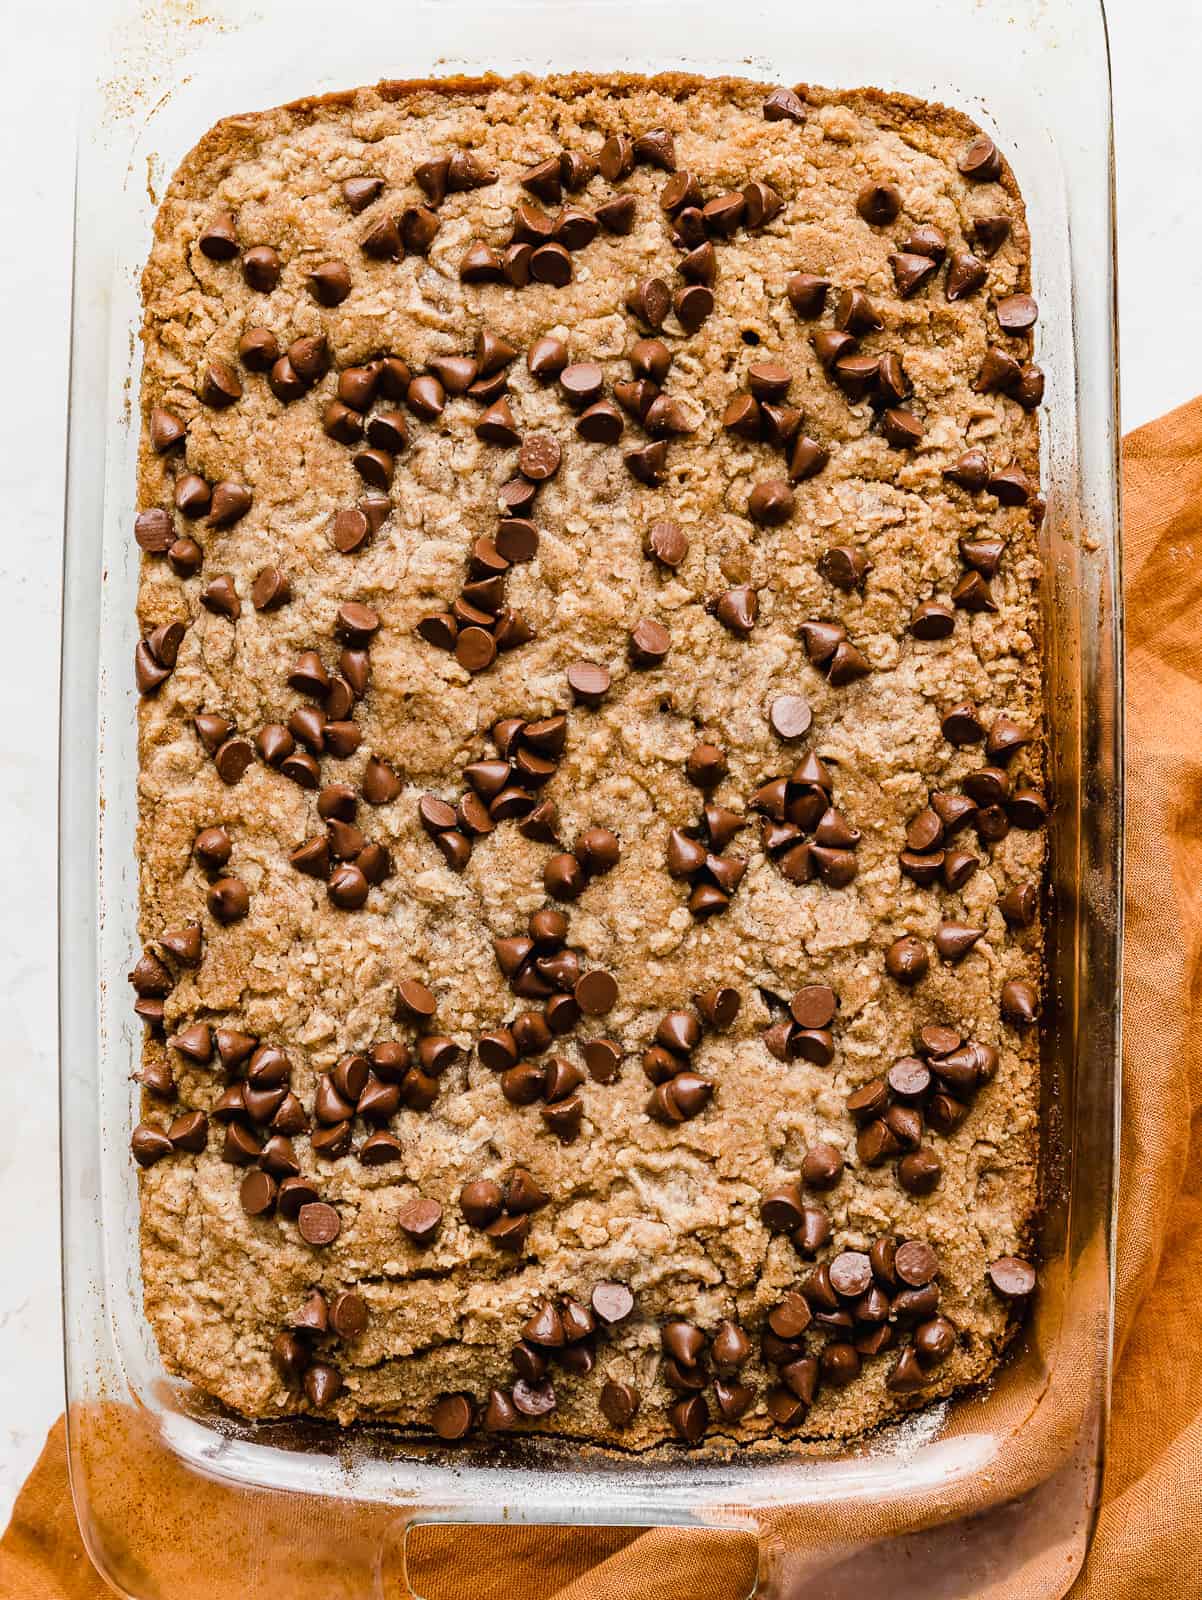 Baked Pumpkin Chocolate Chip Coffee Cake in a 13x9 inch pan.